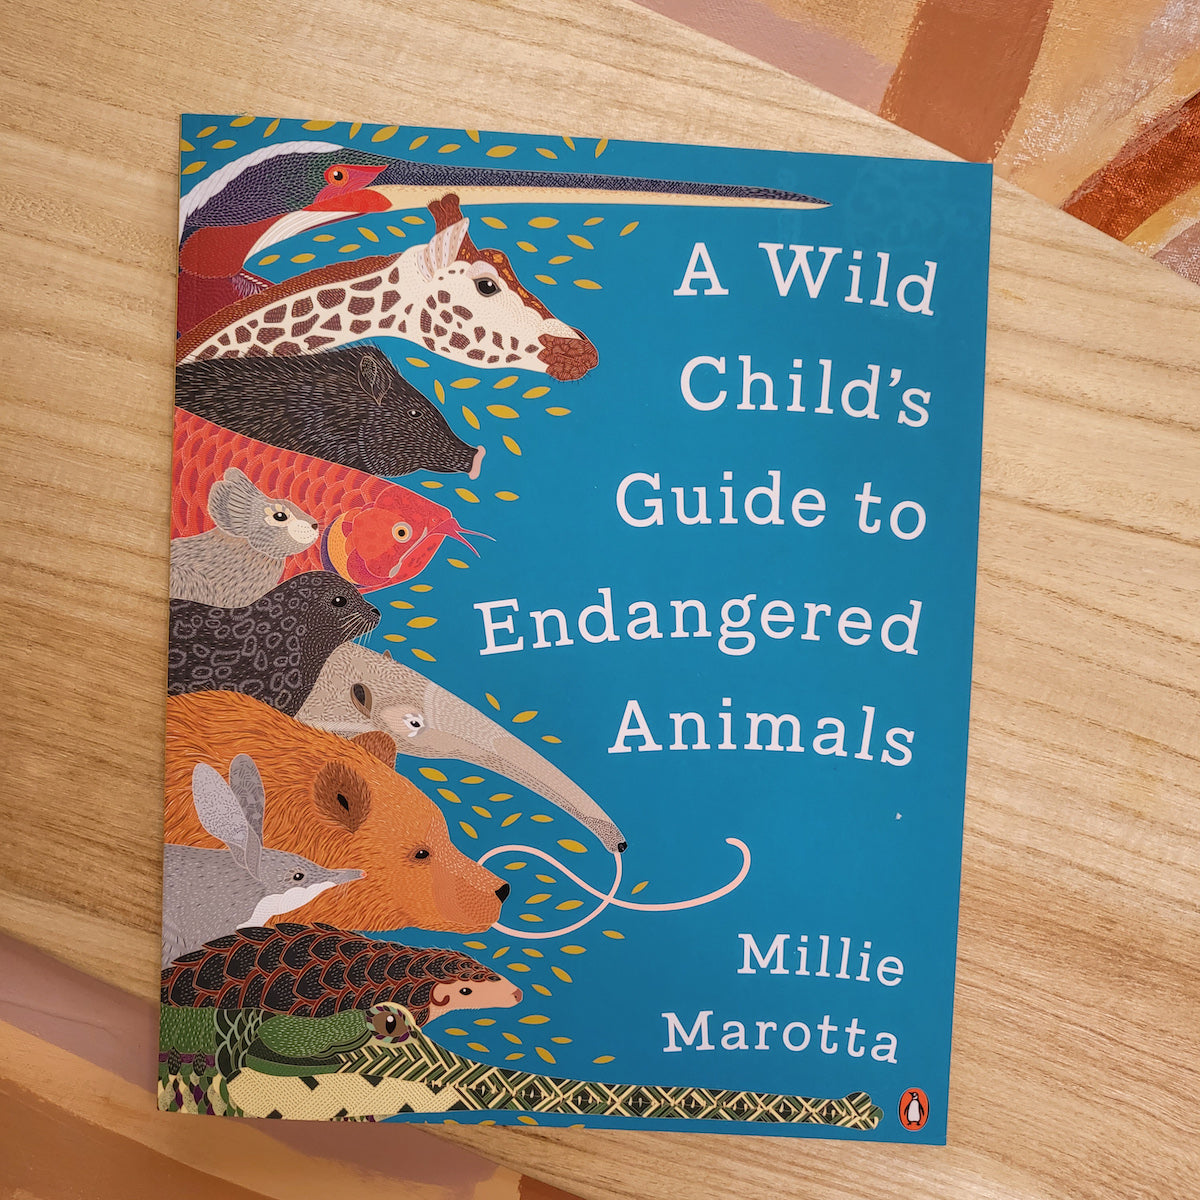 Image of a children's book about A Wild Childs Guide to Endangered Animals